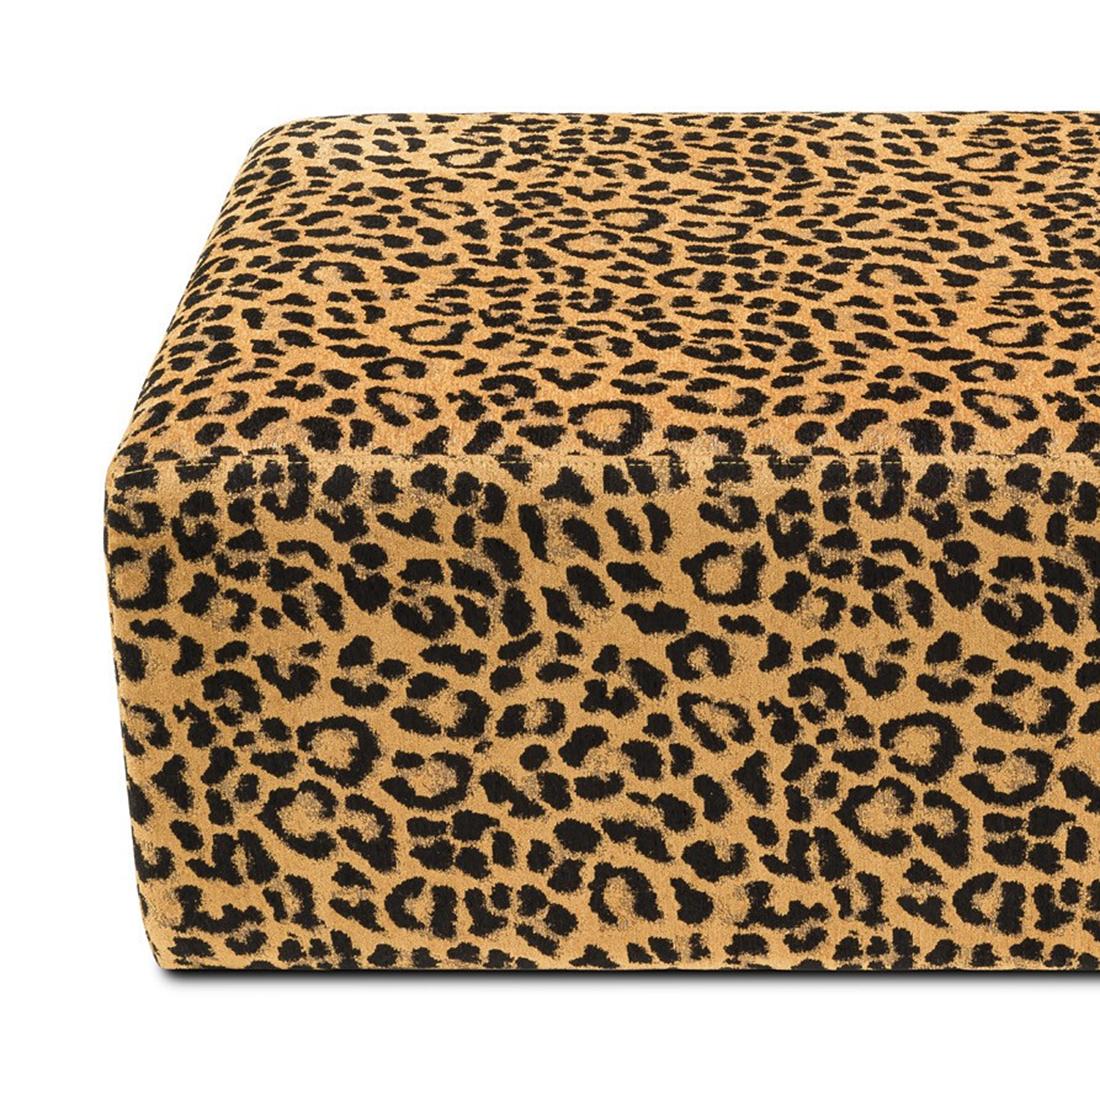 Pouf Leopard with wooden structure. Upholstered 
and covered with smooth velvet leopard fabric.
Also available with black velvet fabric.
 